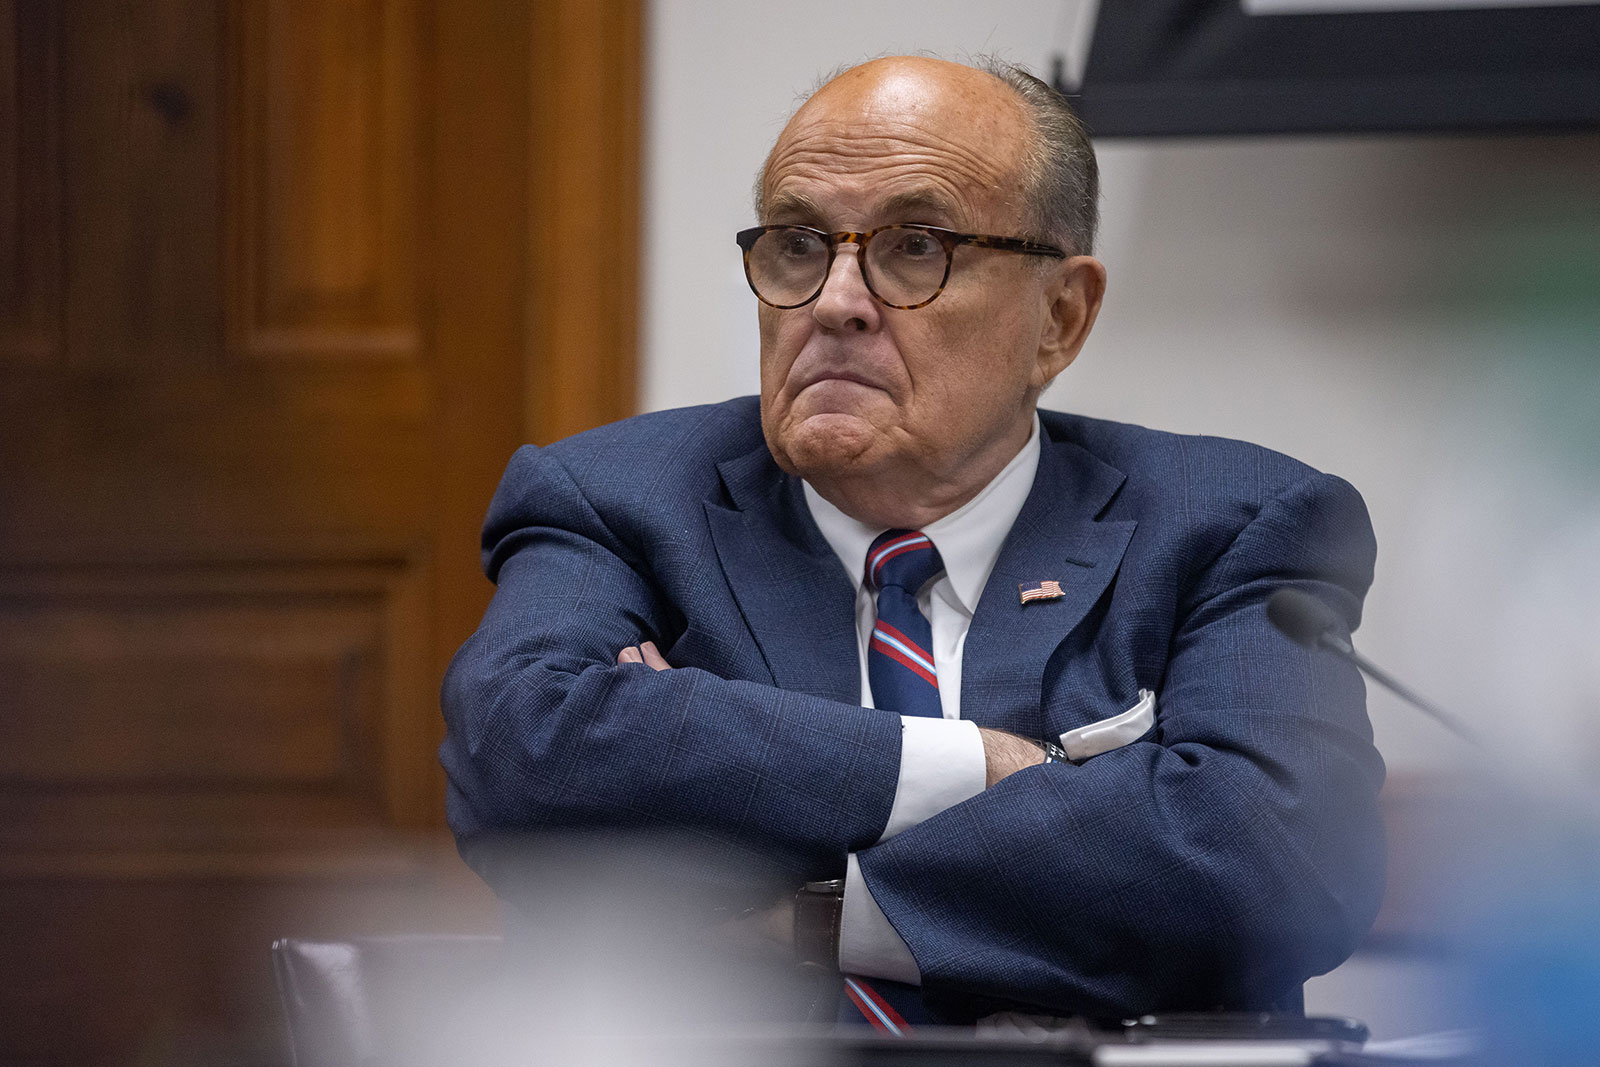 Rudy Giuliani participates in an election hearing at the Georgia Capitol in Atlanta on December 3.